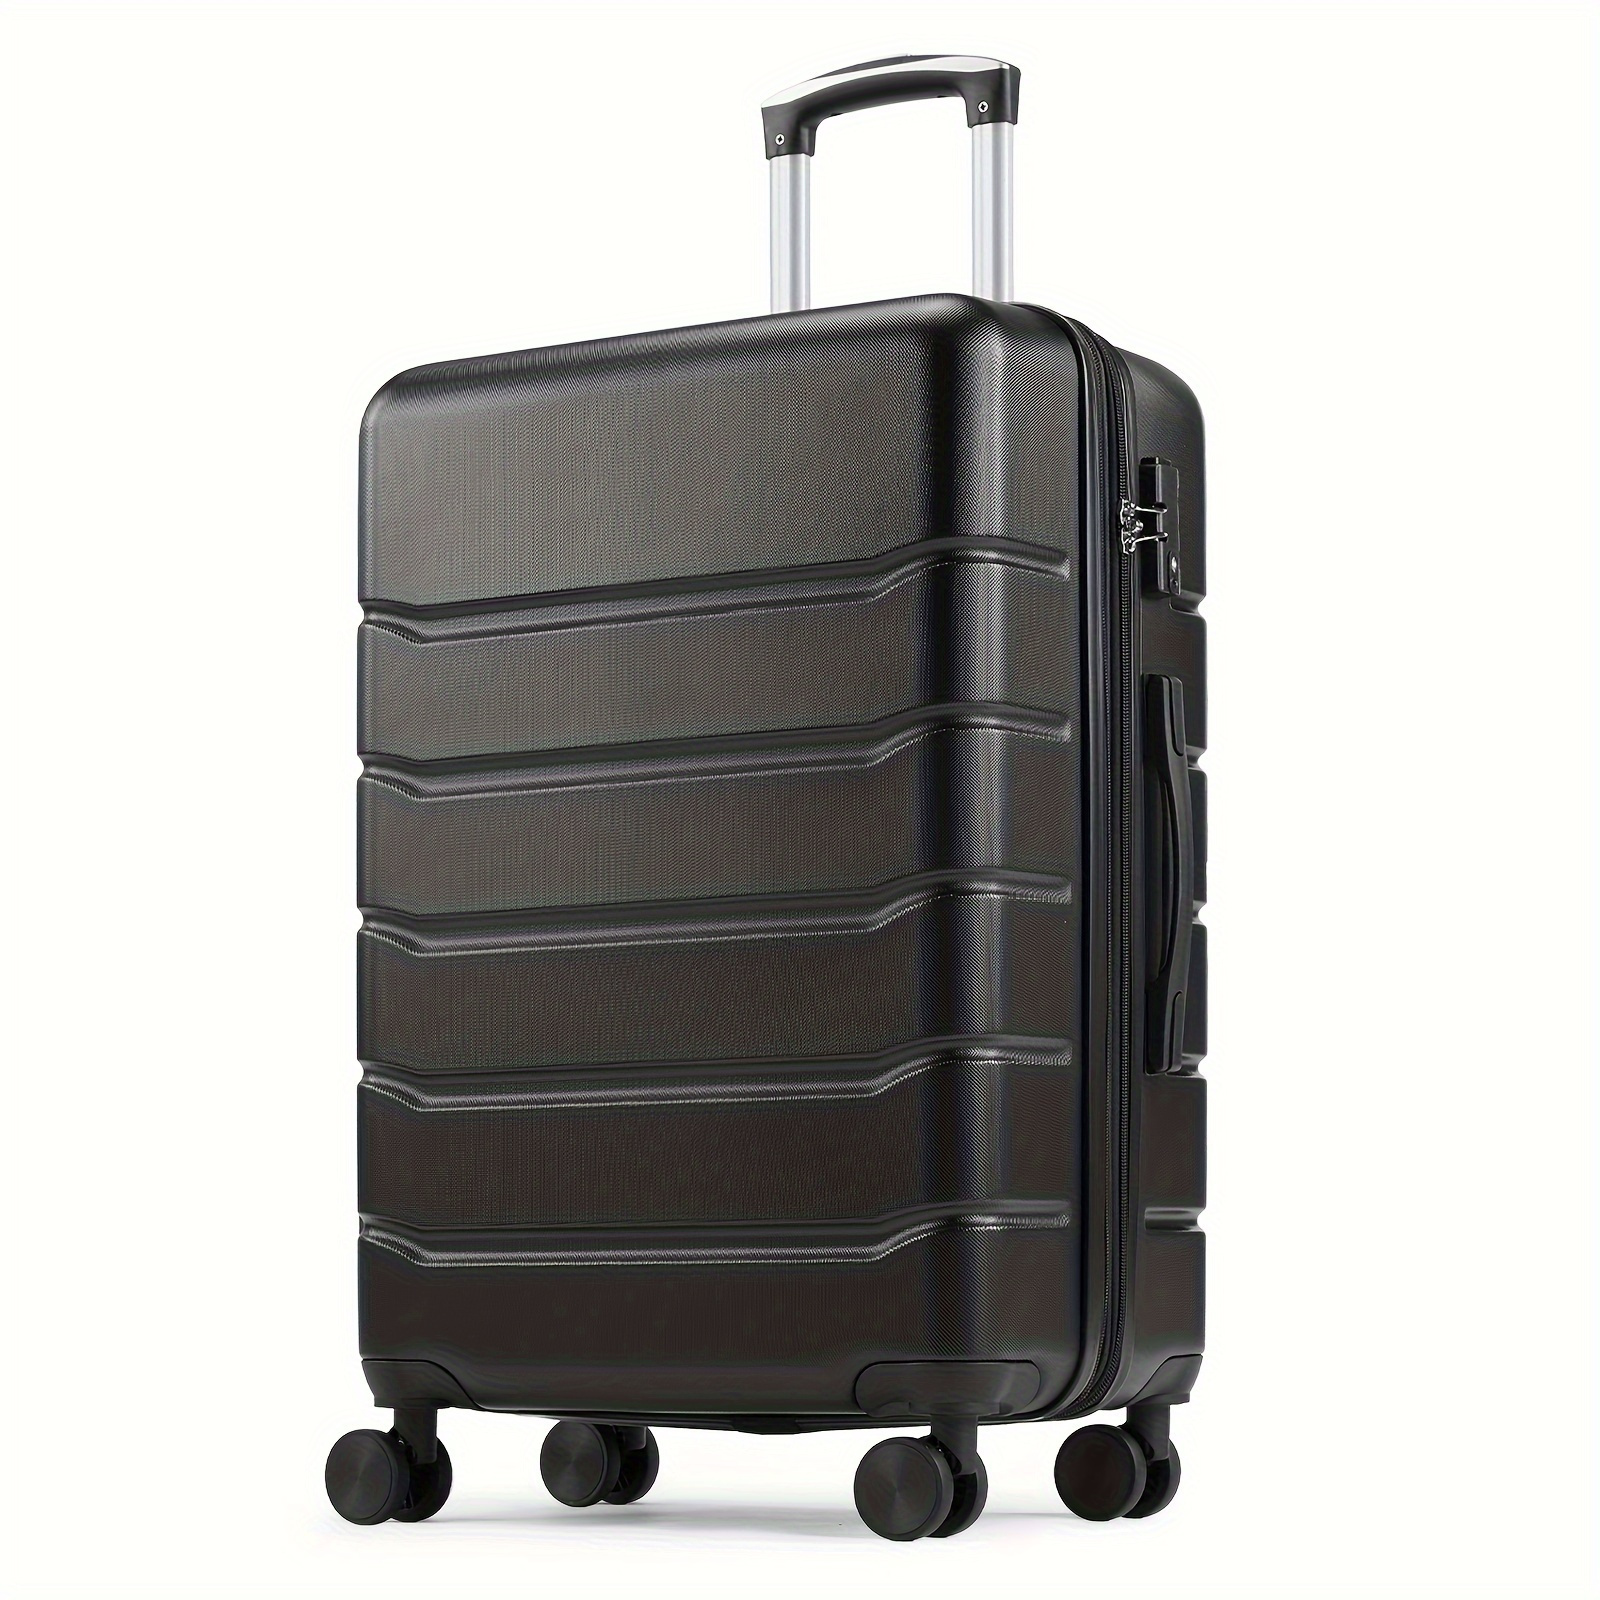 

Hardside Spinner Luggage With 4 Double Wheels, Expandable Bag With Tsa Lock, Lightweight Roller Suitcase, Hard Shell Travel Bag